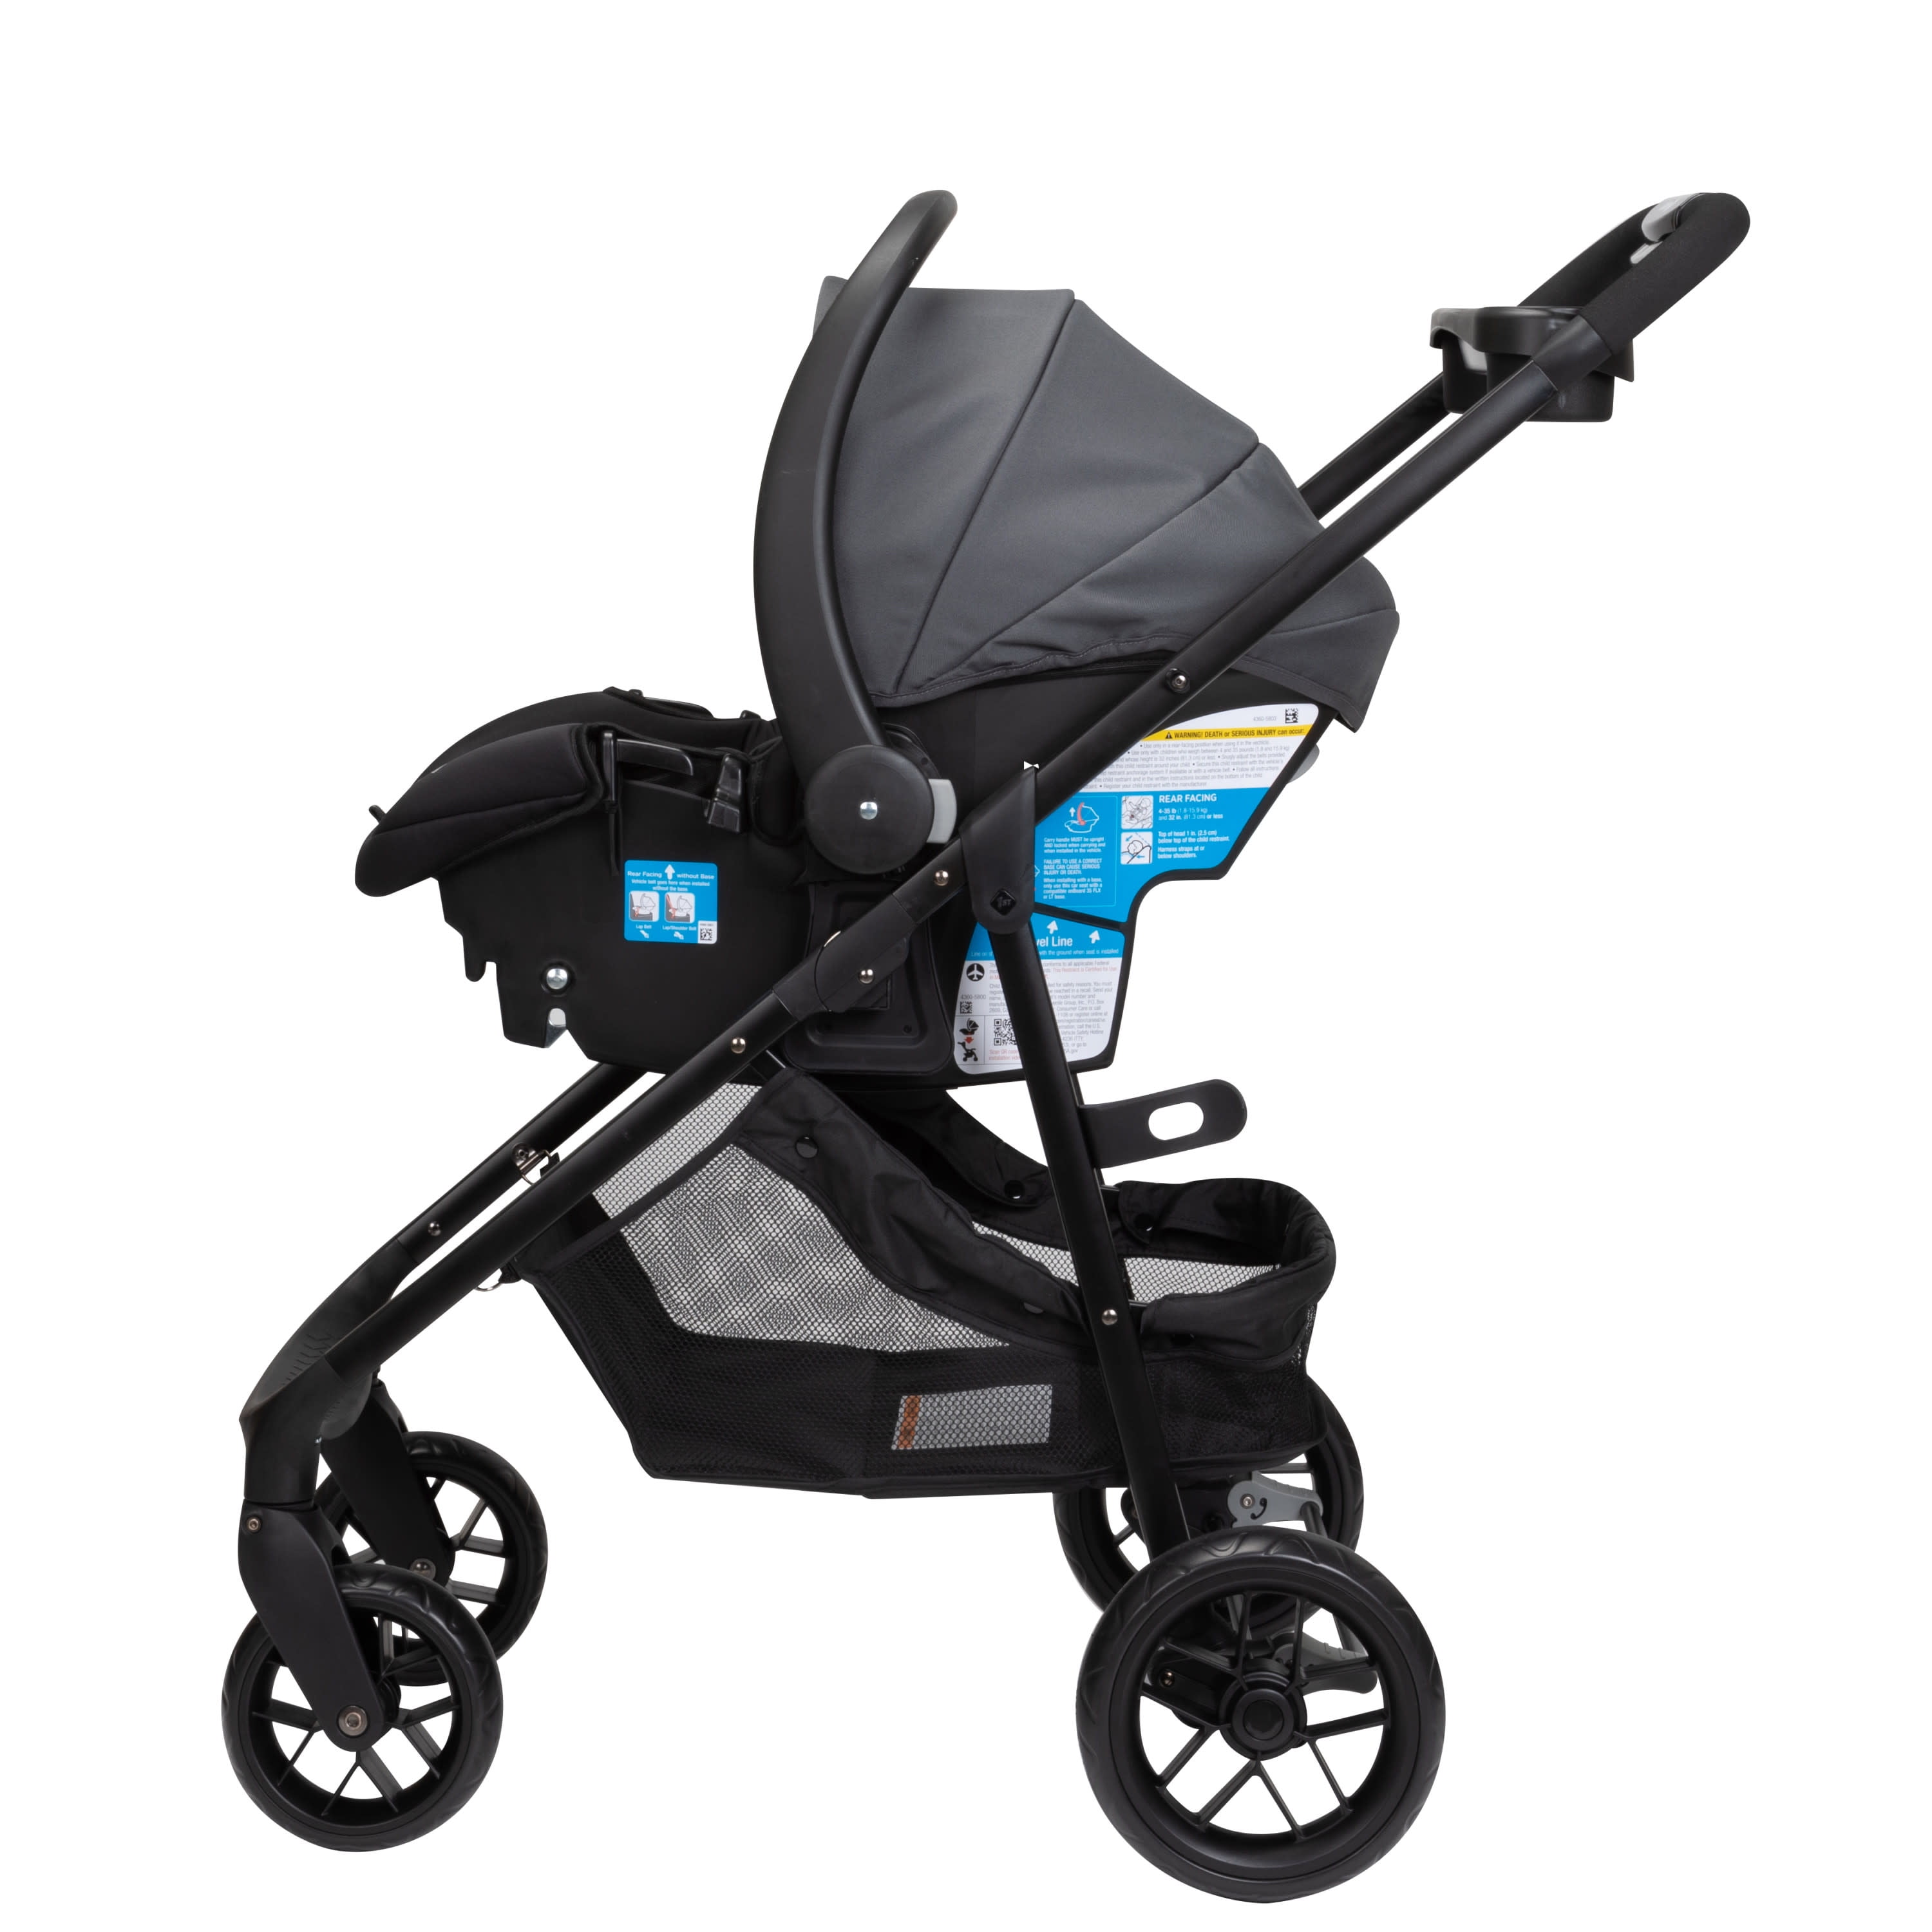 Foundry Safety 1st Grow and Go Flex 8-in-1 Travel System 